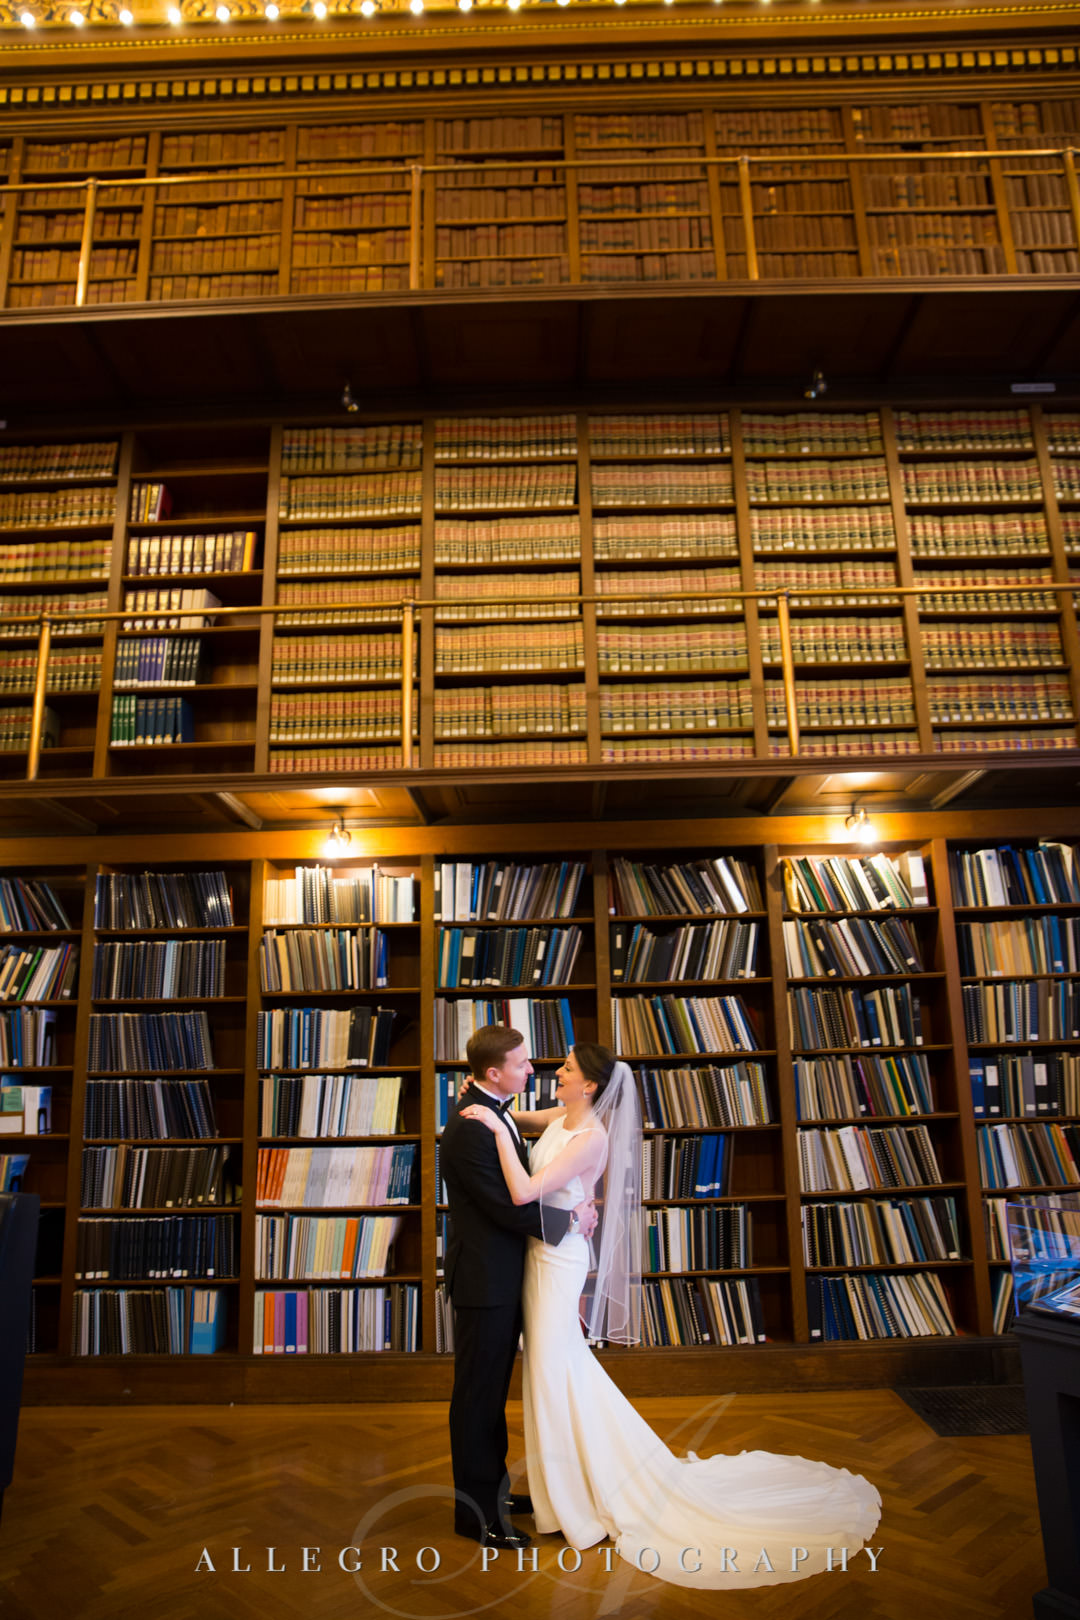 ri state house library- Bride and groom embrace in library stacks- rhode island state house